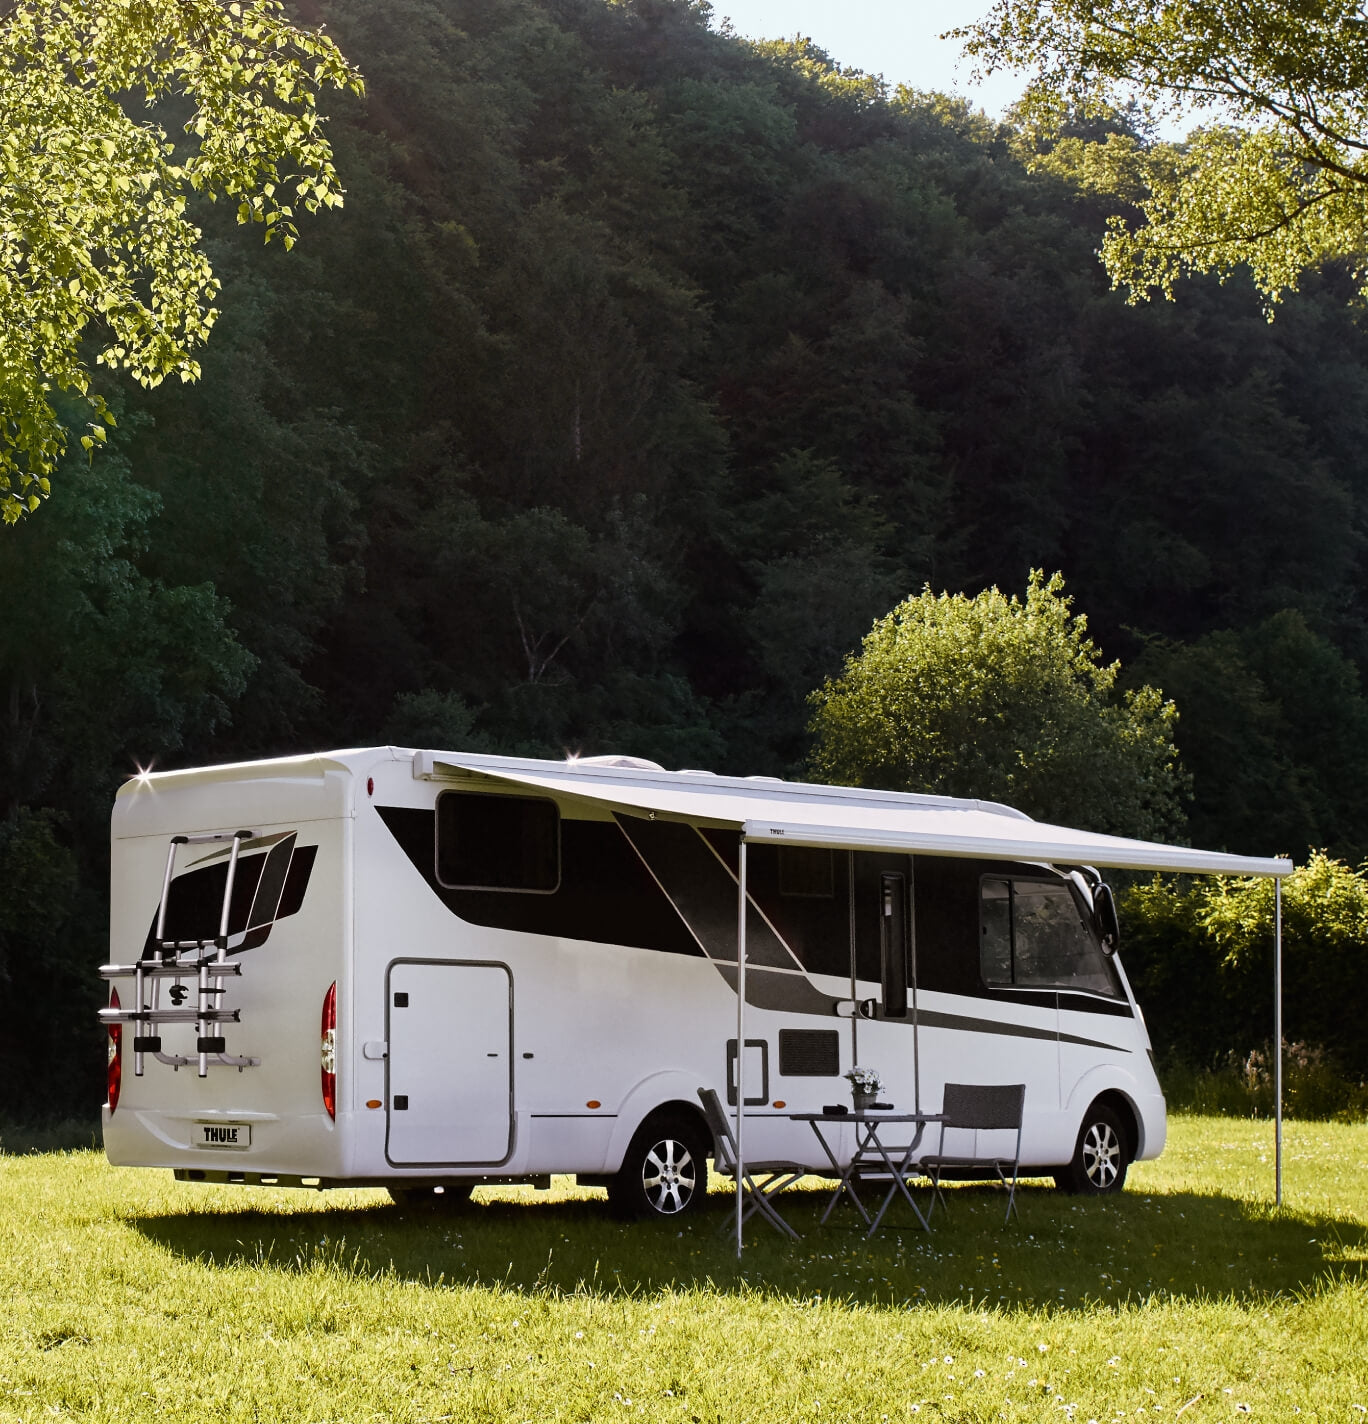 Thule Omnistor 5200 pitched to a motorhome